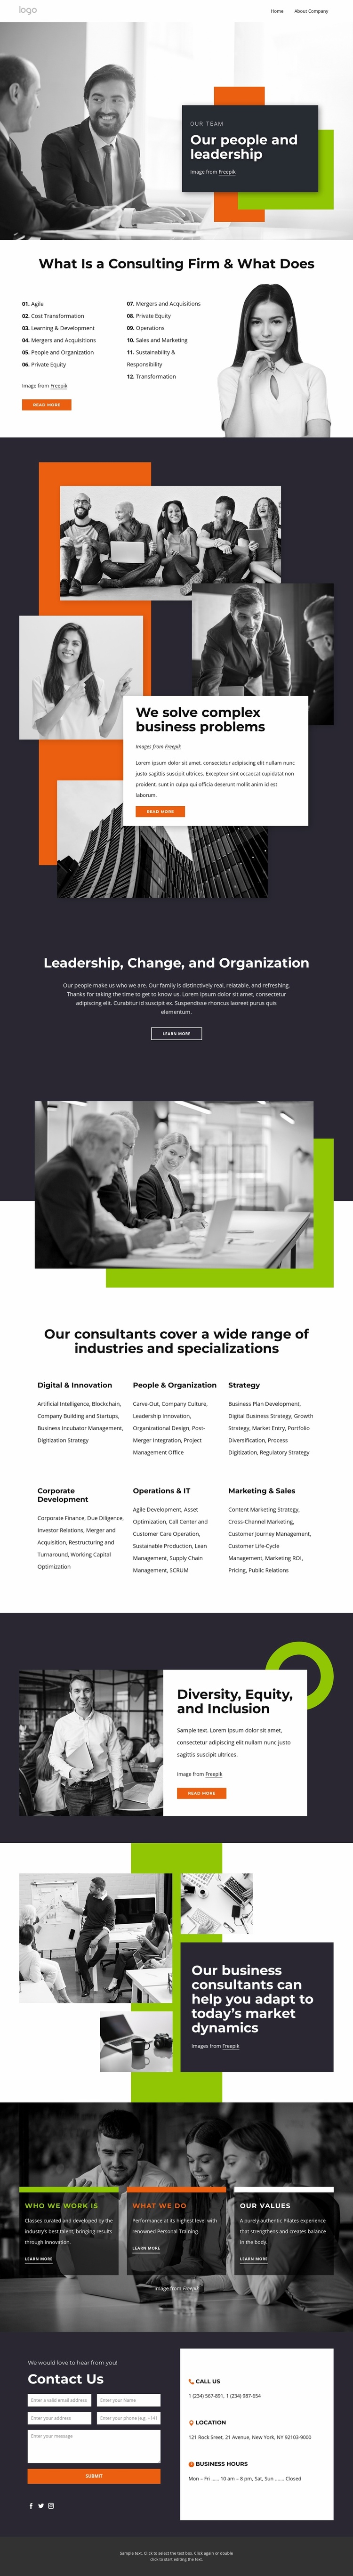 Our people, partners and leadership Website Template